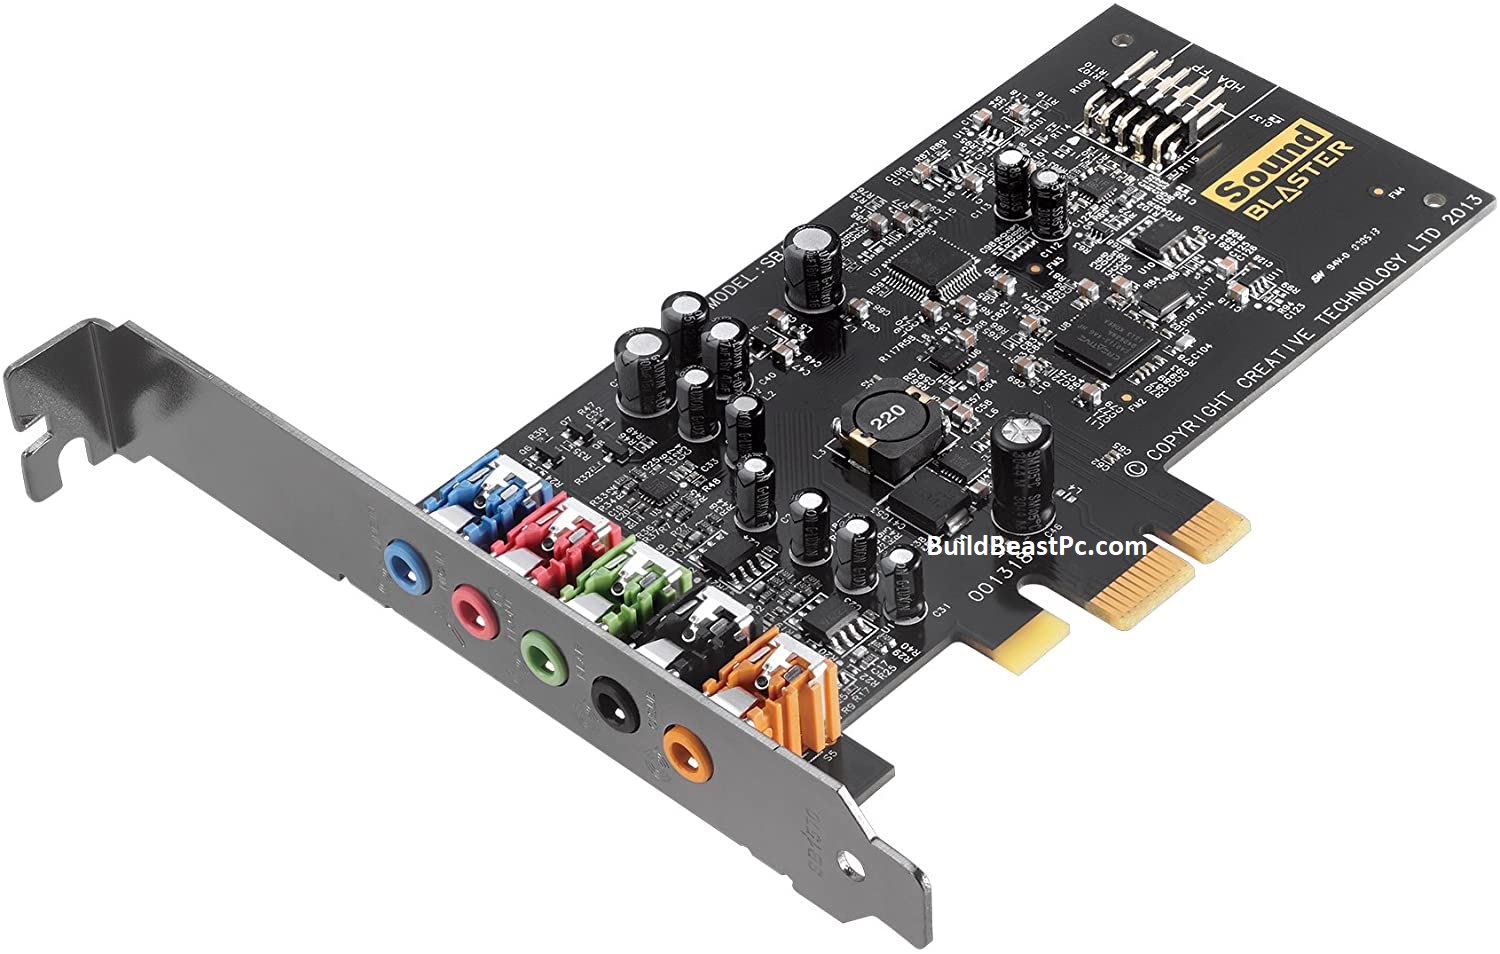 Factors to Consider Before Investing in a Sound Card